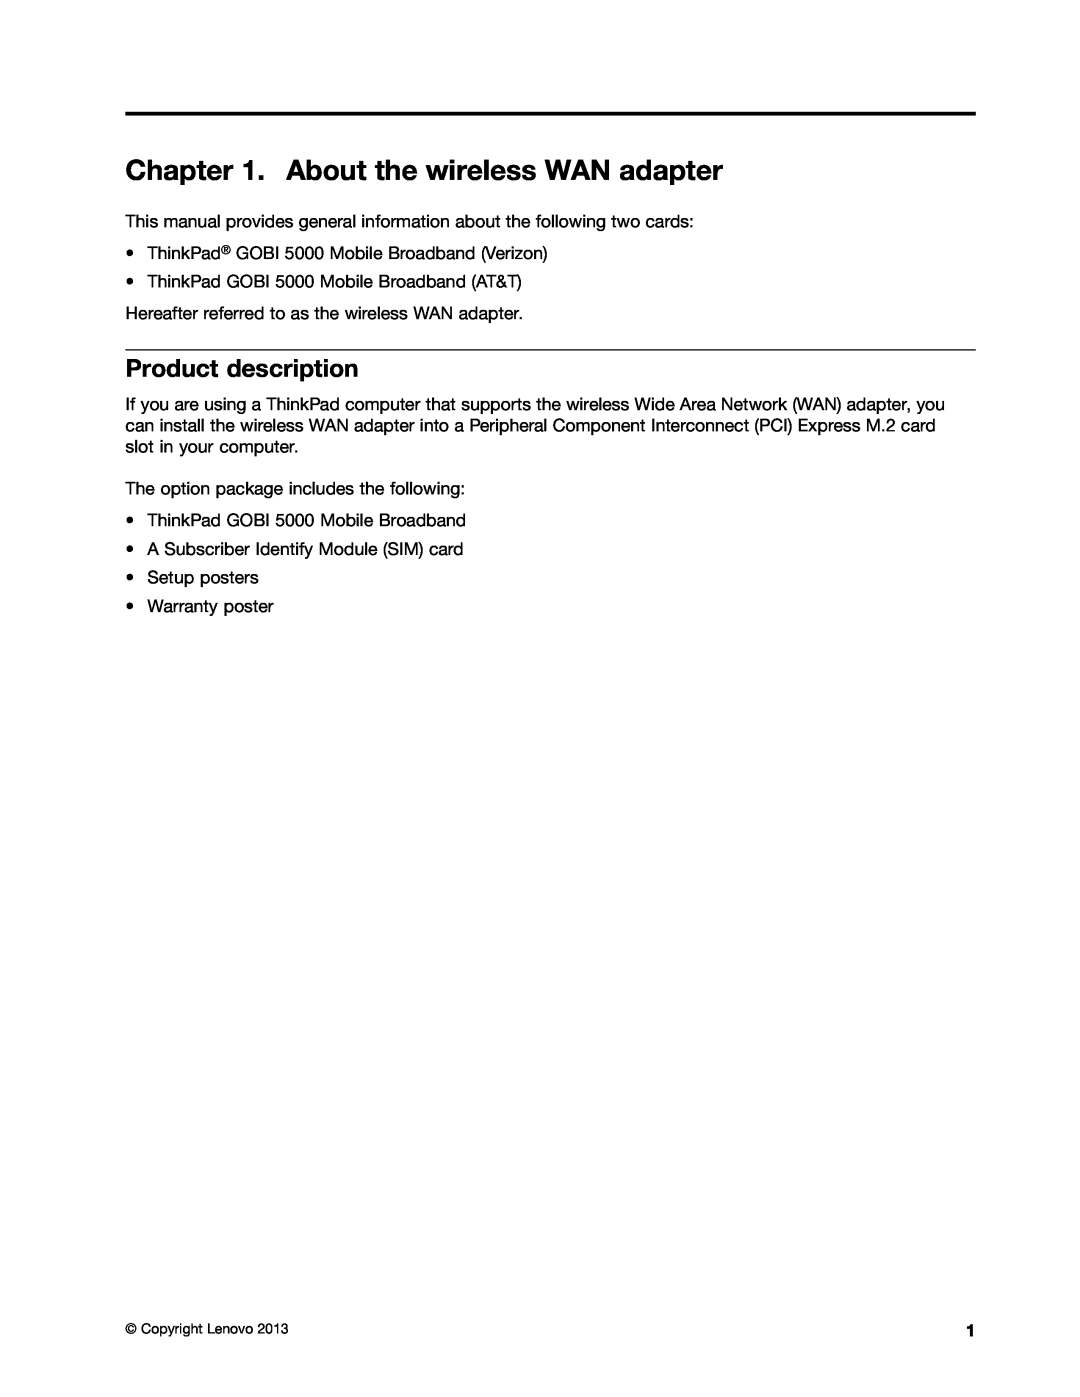 Lenovo GOBI 5000 manual About the wireless WAN adapter, Product description 